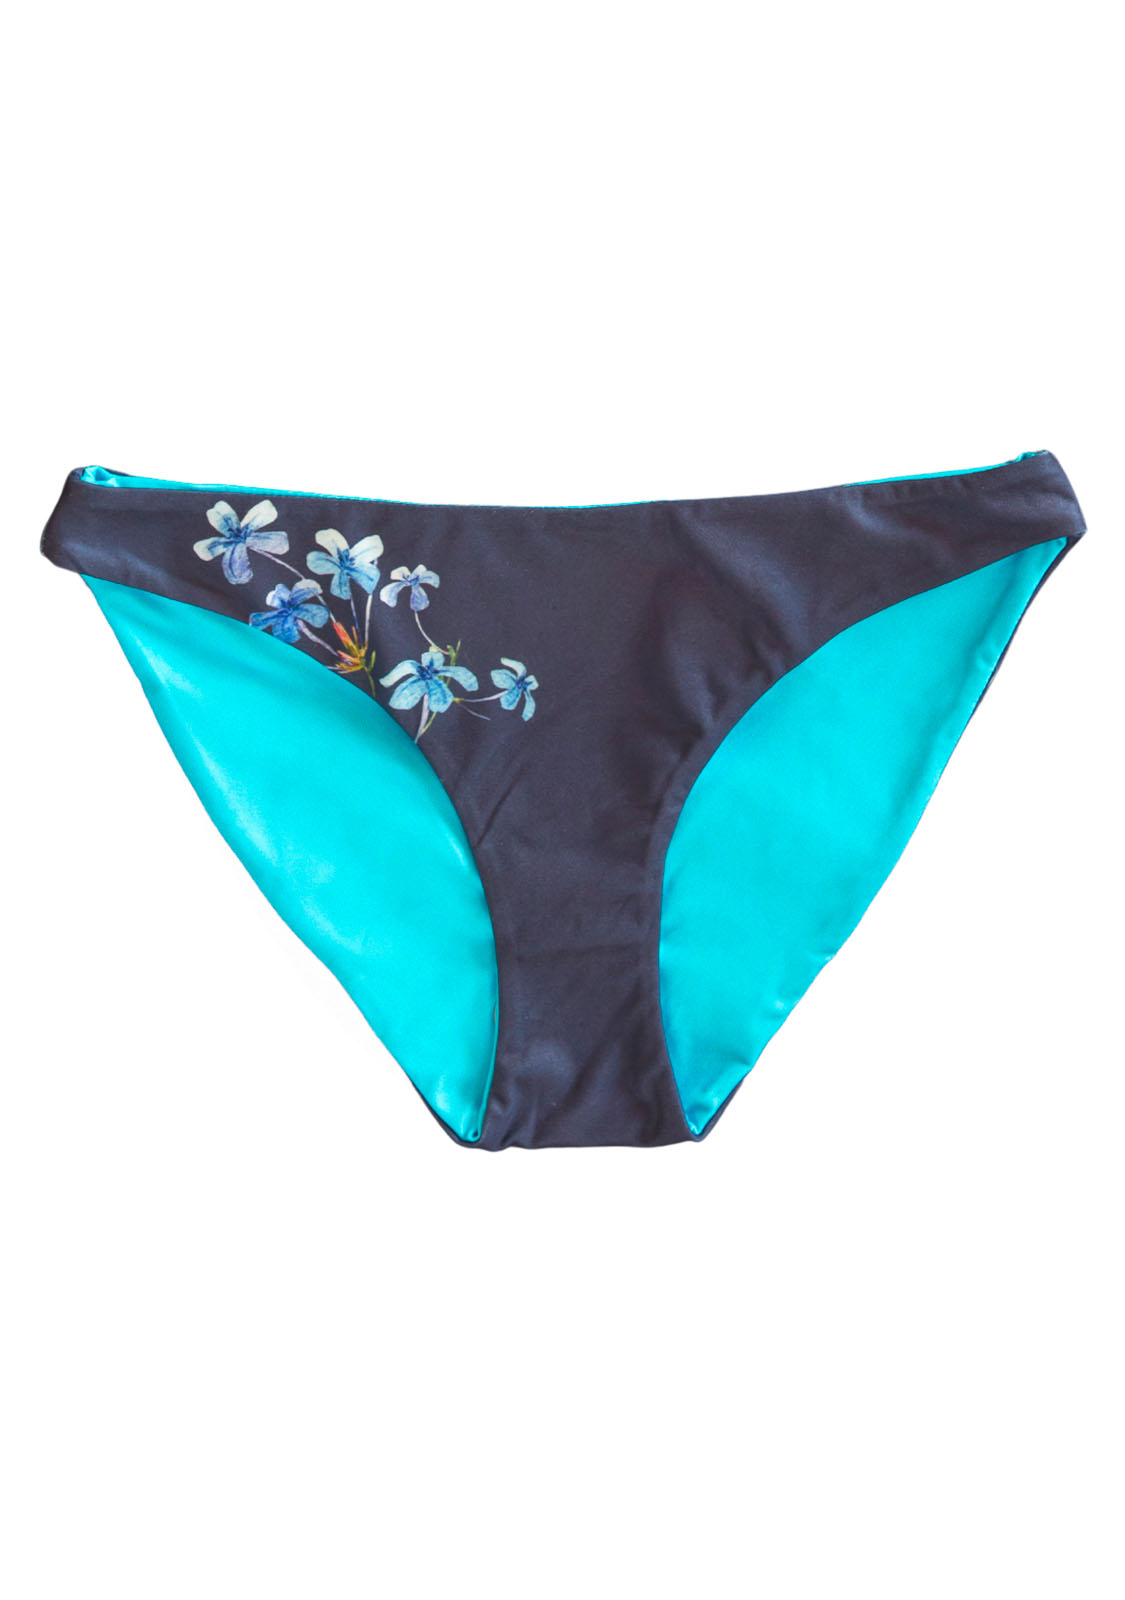 VIOLA - FULL BOTTOMS Reversible & Sustainable